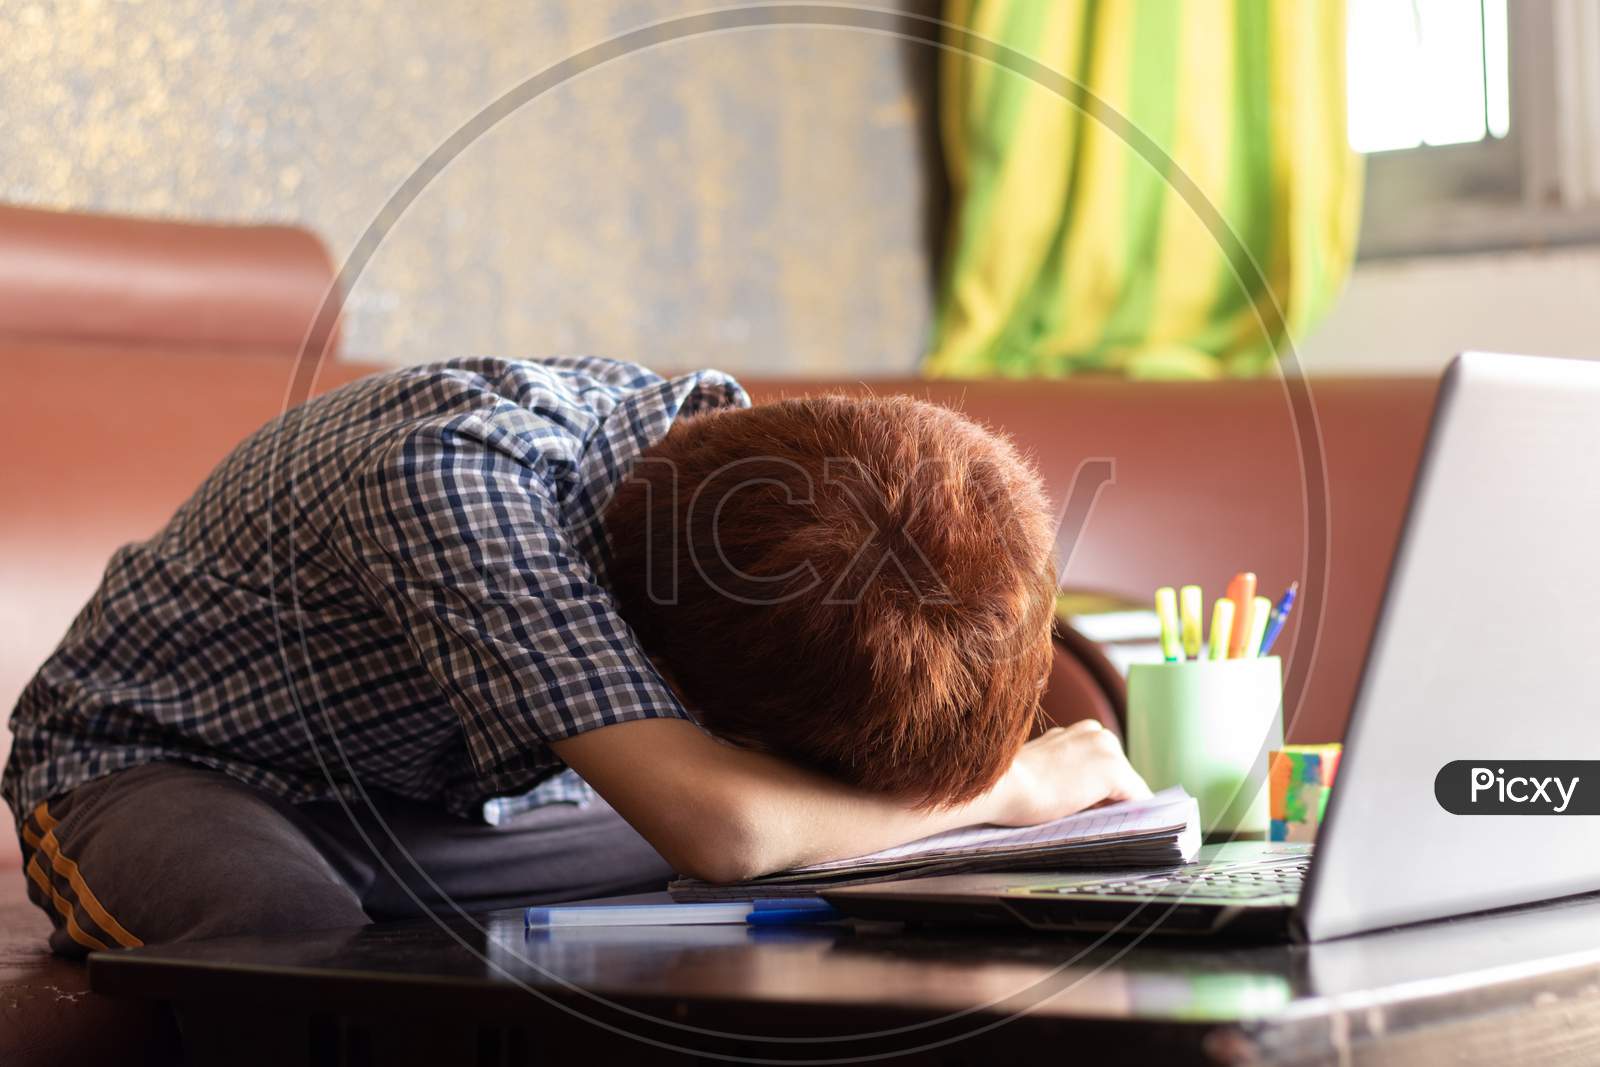 Bored Kid Slept Infront Of Laptop During Remote Learning - Concept Of Kid Tired From E-Learning Or Online Education At Home During Covid-19 Or Coronavirus Outbreak.